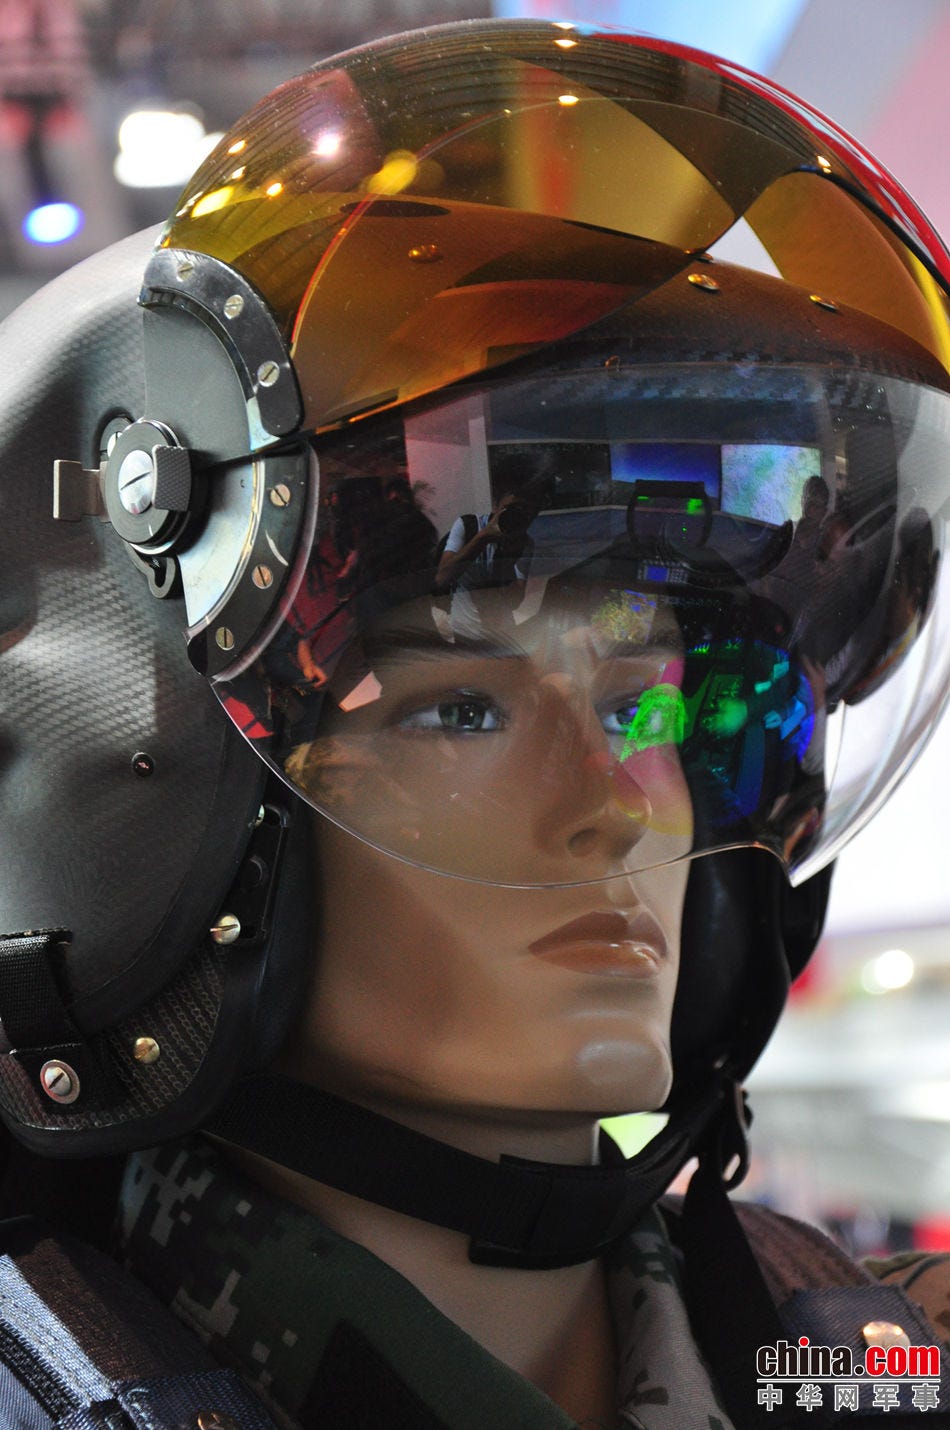 A mock up of an advanced helmet mounted display at Zhuhai Airshow 2014